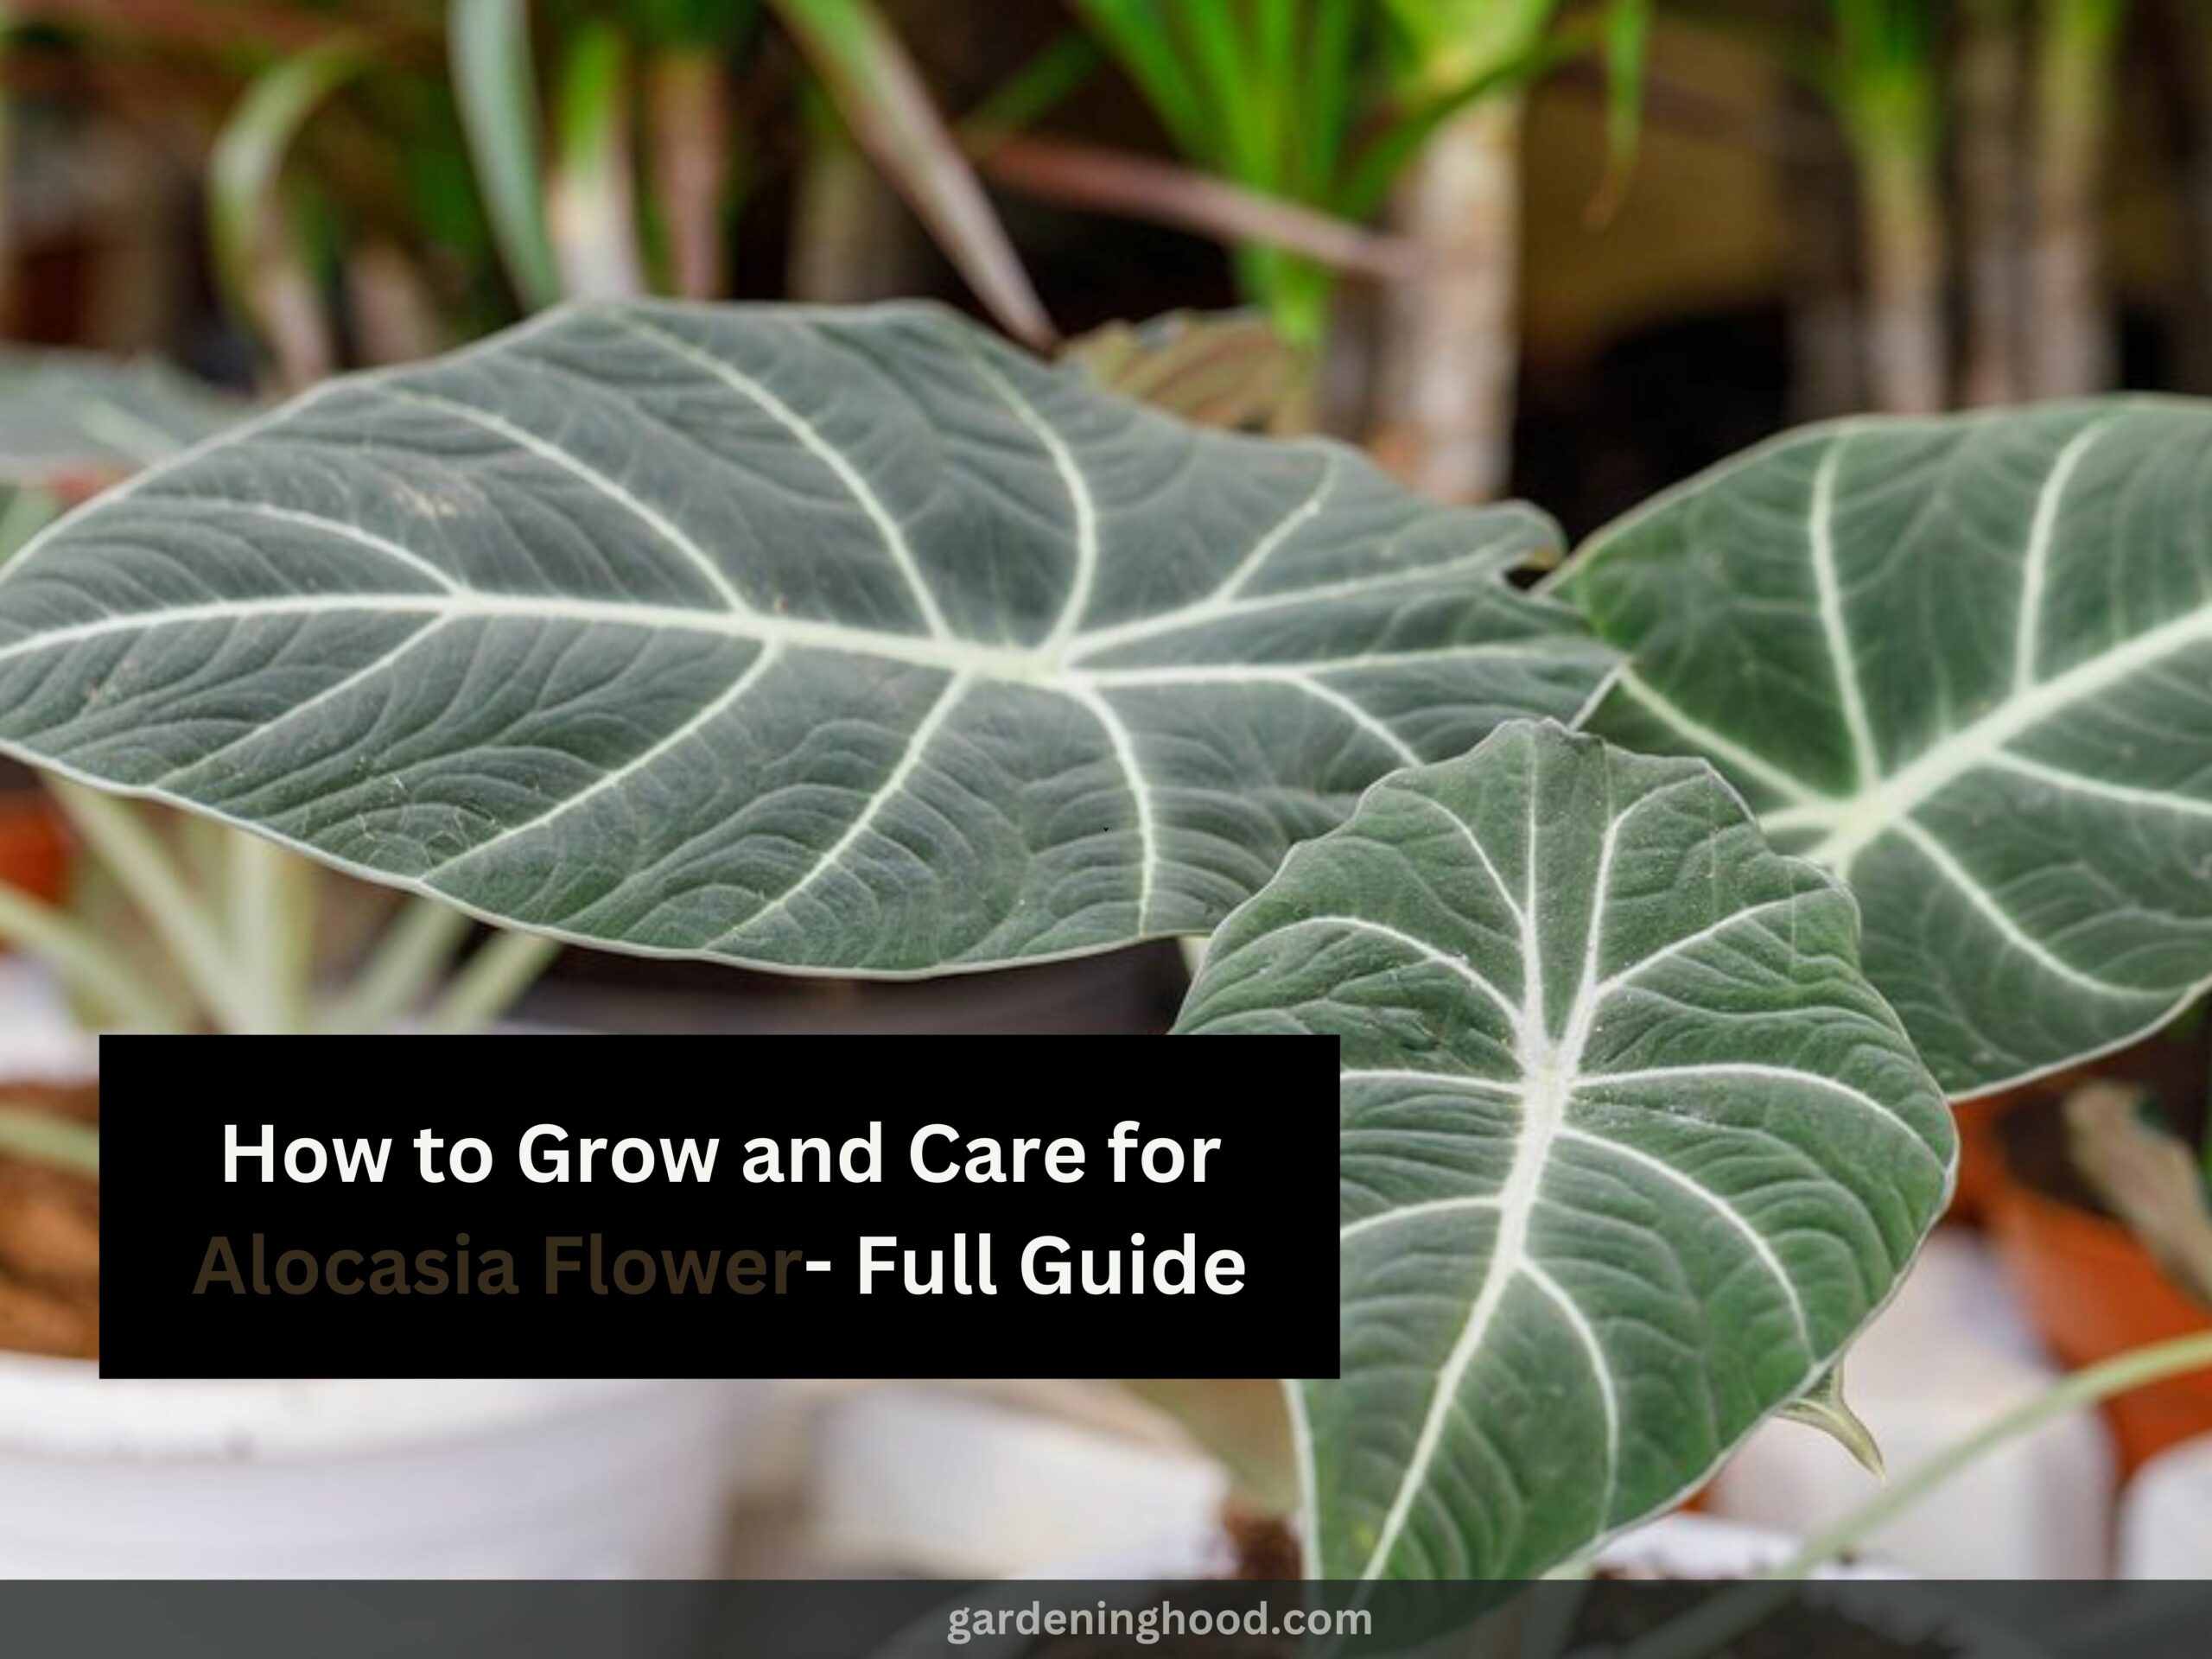 How to Grow and Care for Alocasia Flower- Full Guide